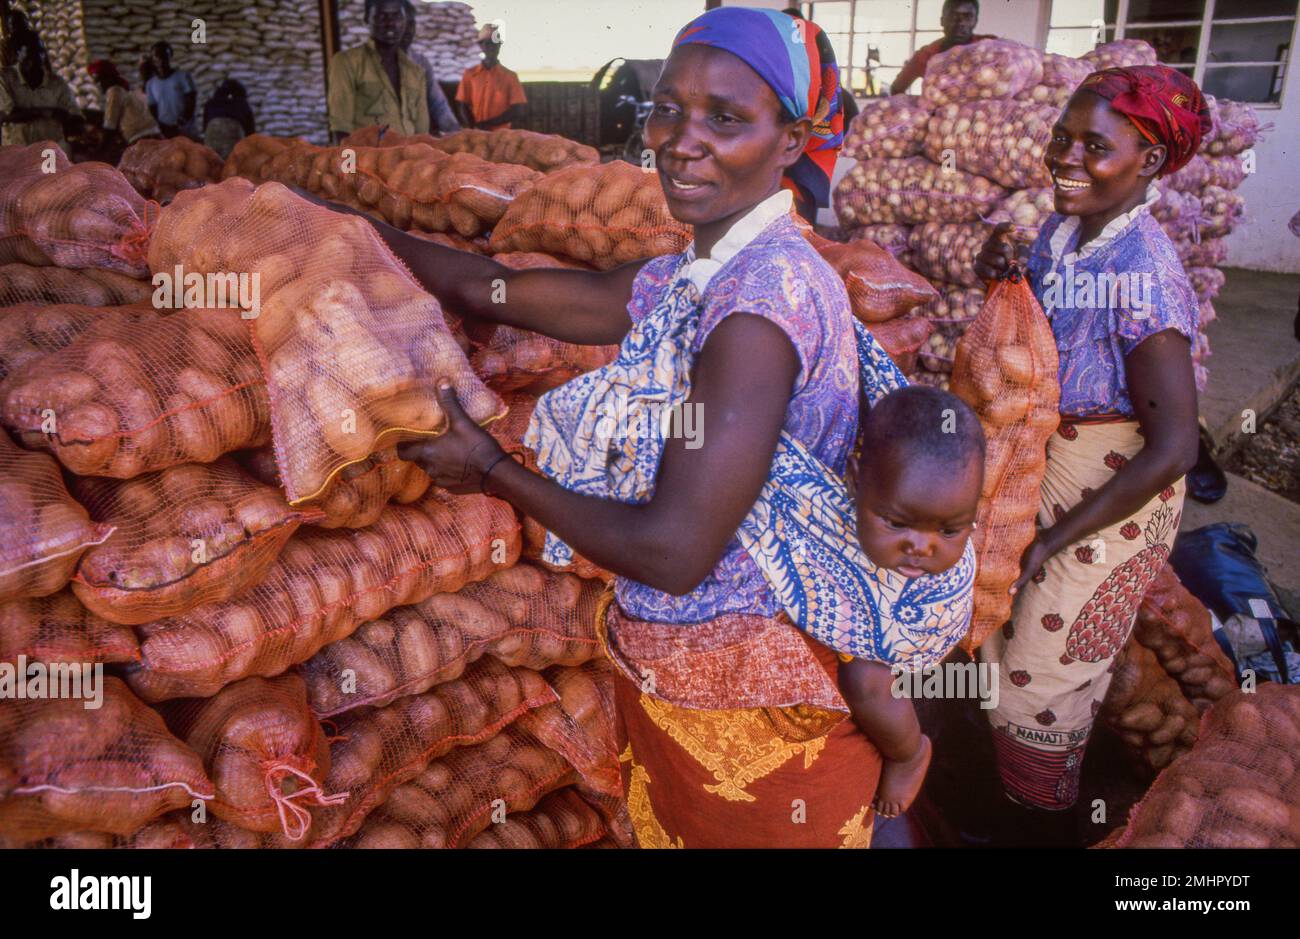 Zambia, Lusaka. Women buying potatoes from a wholesaler. They sell the potatoes in the market by weight. Stock Photo